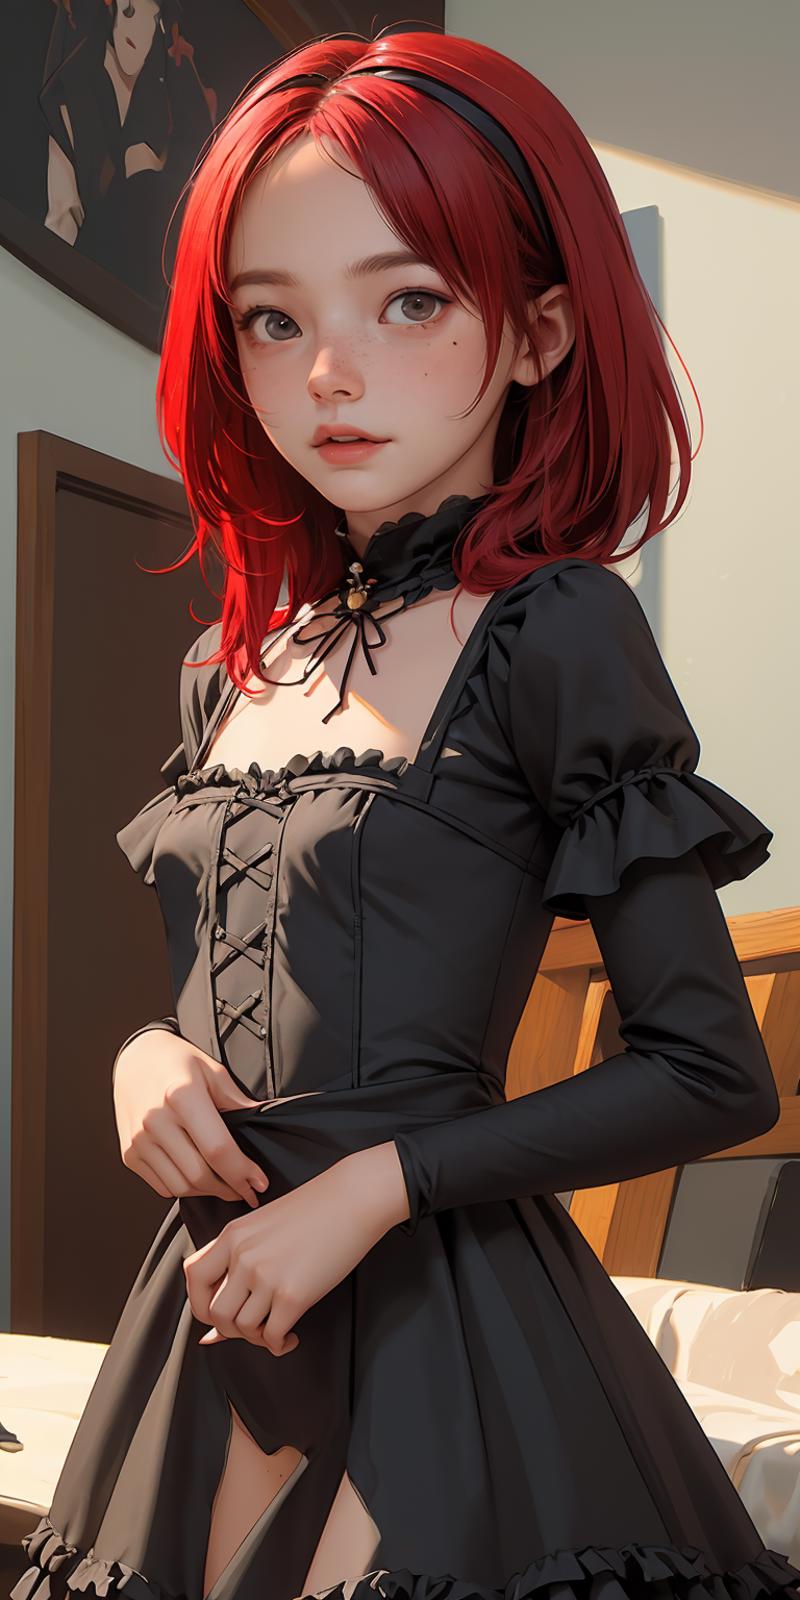 A 3D rendered image of a woman wearing a black lace dress.